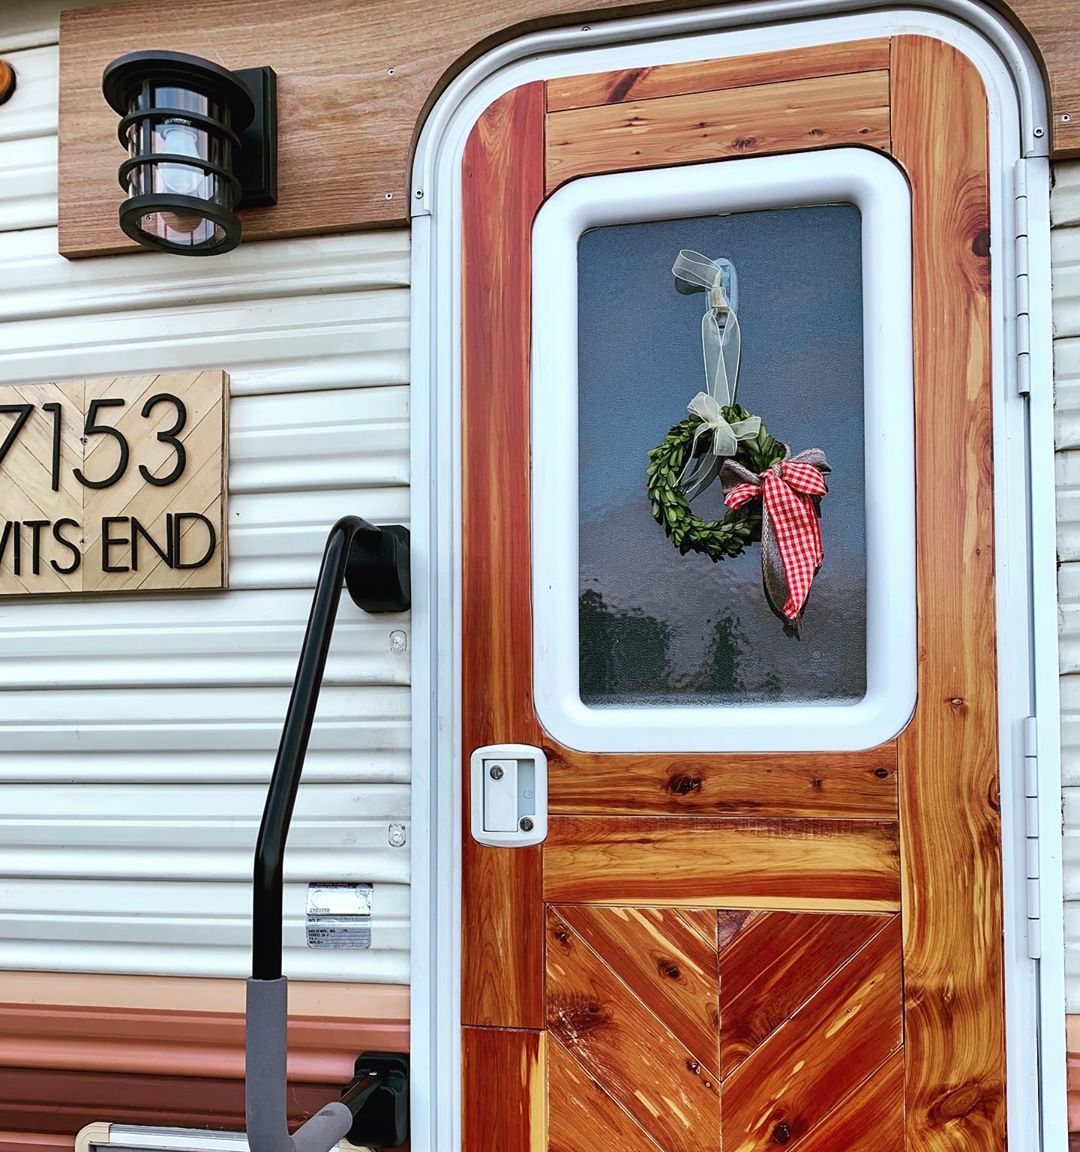 updated exterior of an RV with reclaimed wood on door and new porch light photo by Instagram user @robyns__nest__